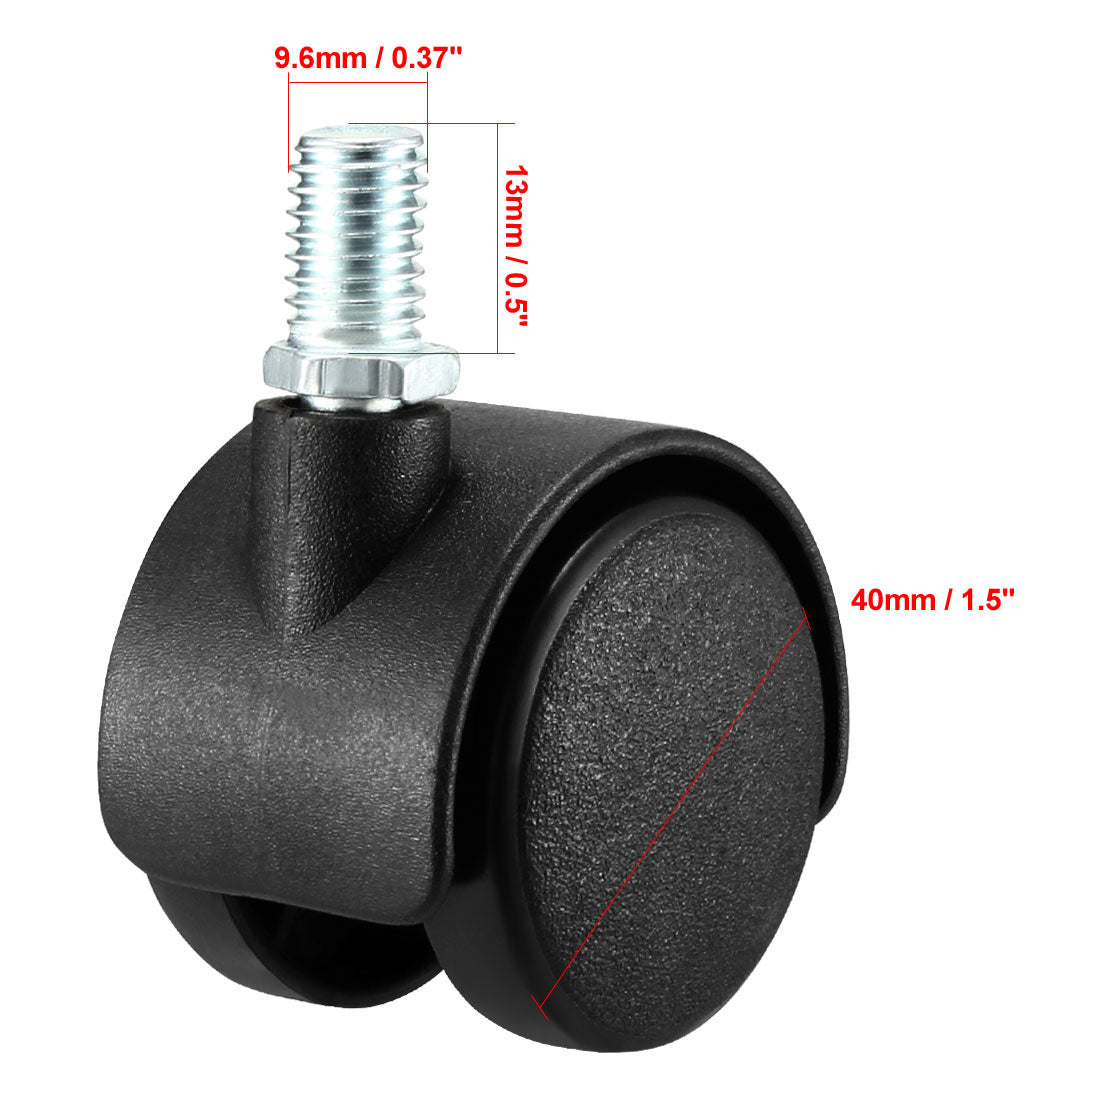 Uxcell Uxcell Swivel Casters 1.45 Inch Nylon 360 Degree M8 x 13mm Threaded Caster Wheels for Furniture Chair , 4 Pcs